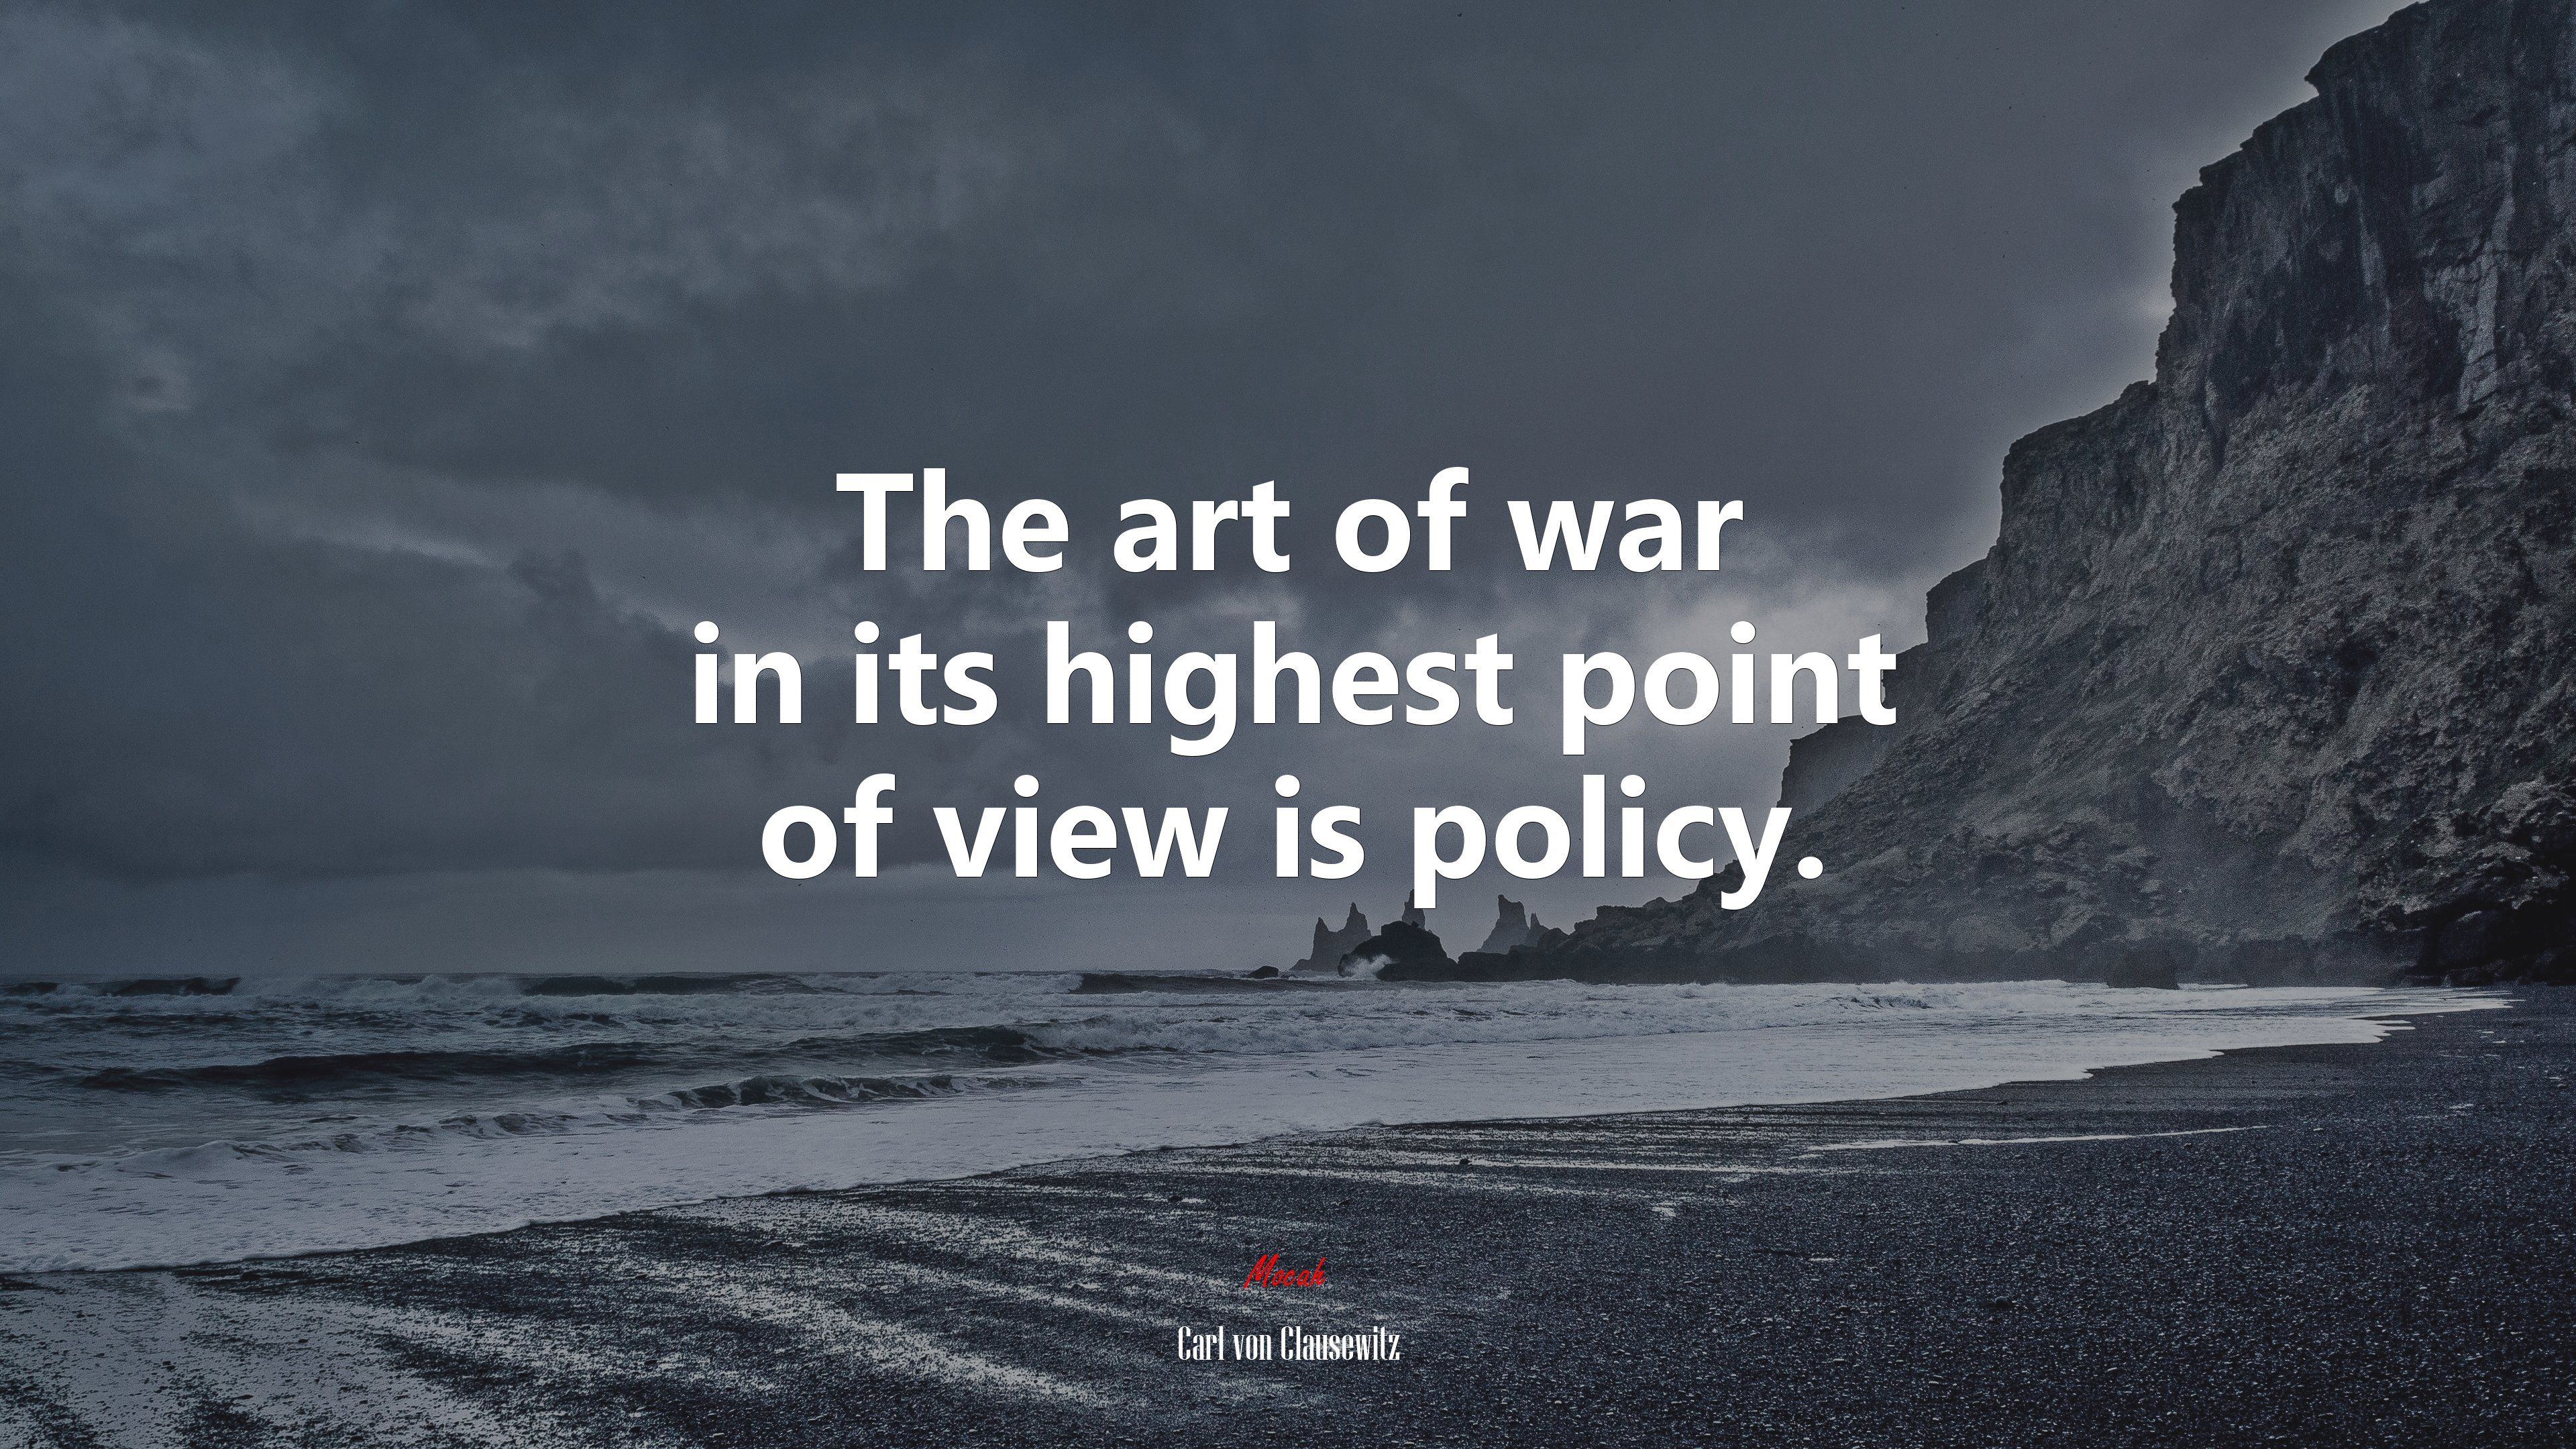 The art of war in its highest point of view is policy. Carl von Clausewitz quote, 4k wallpaper. Mocah.org HD Desktop Wallpaper